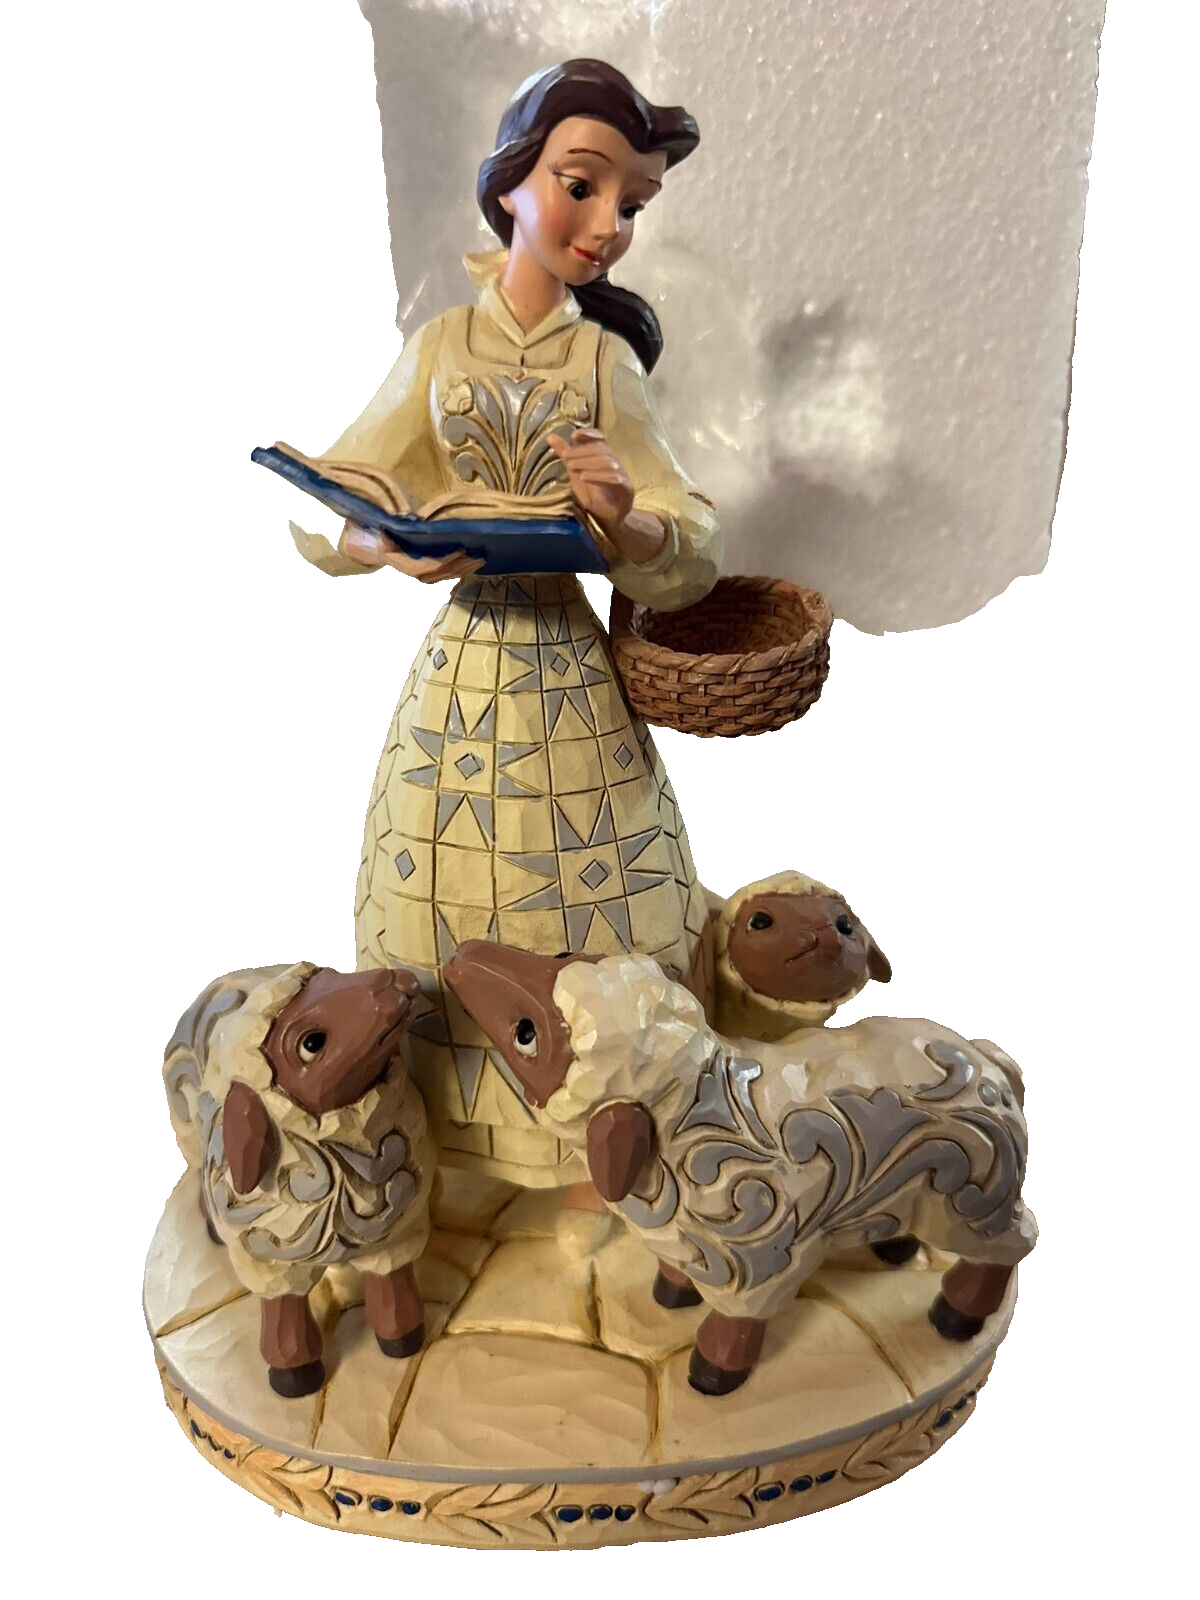 Disney Traditions Bookish Beauty Figurine SMALL DAMAGED Discounted give away.